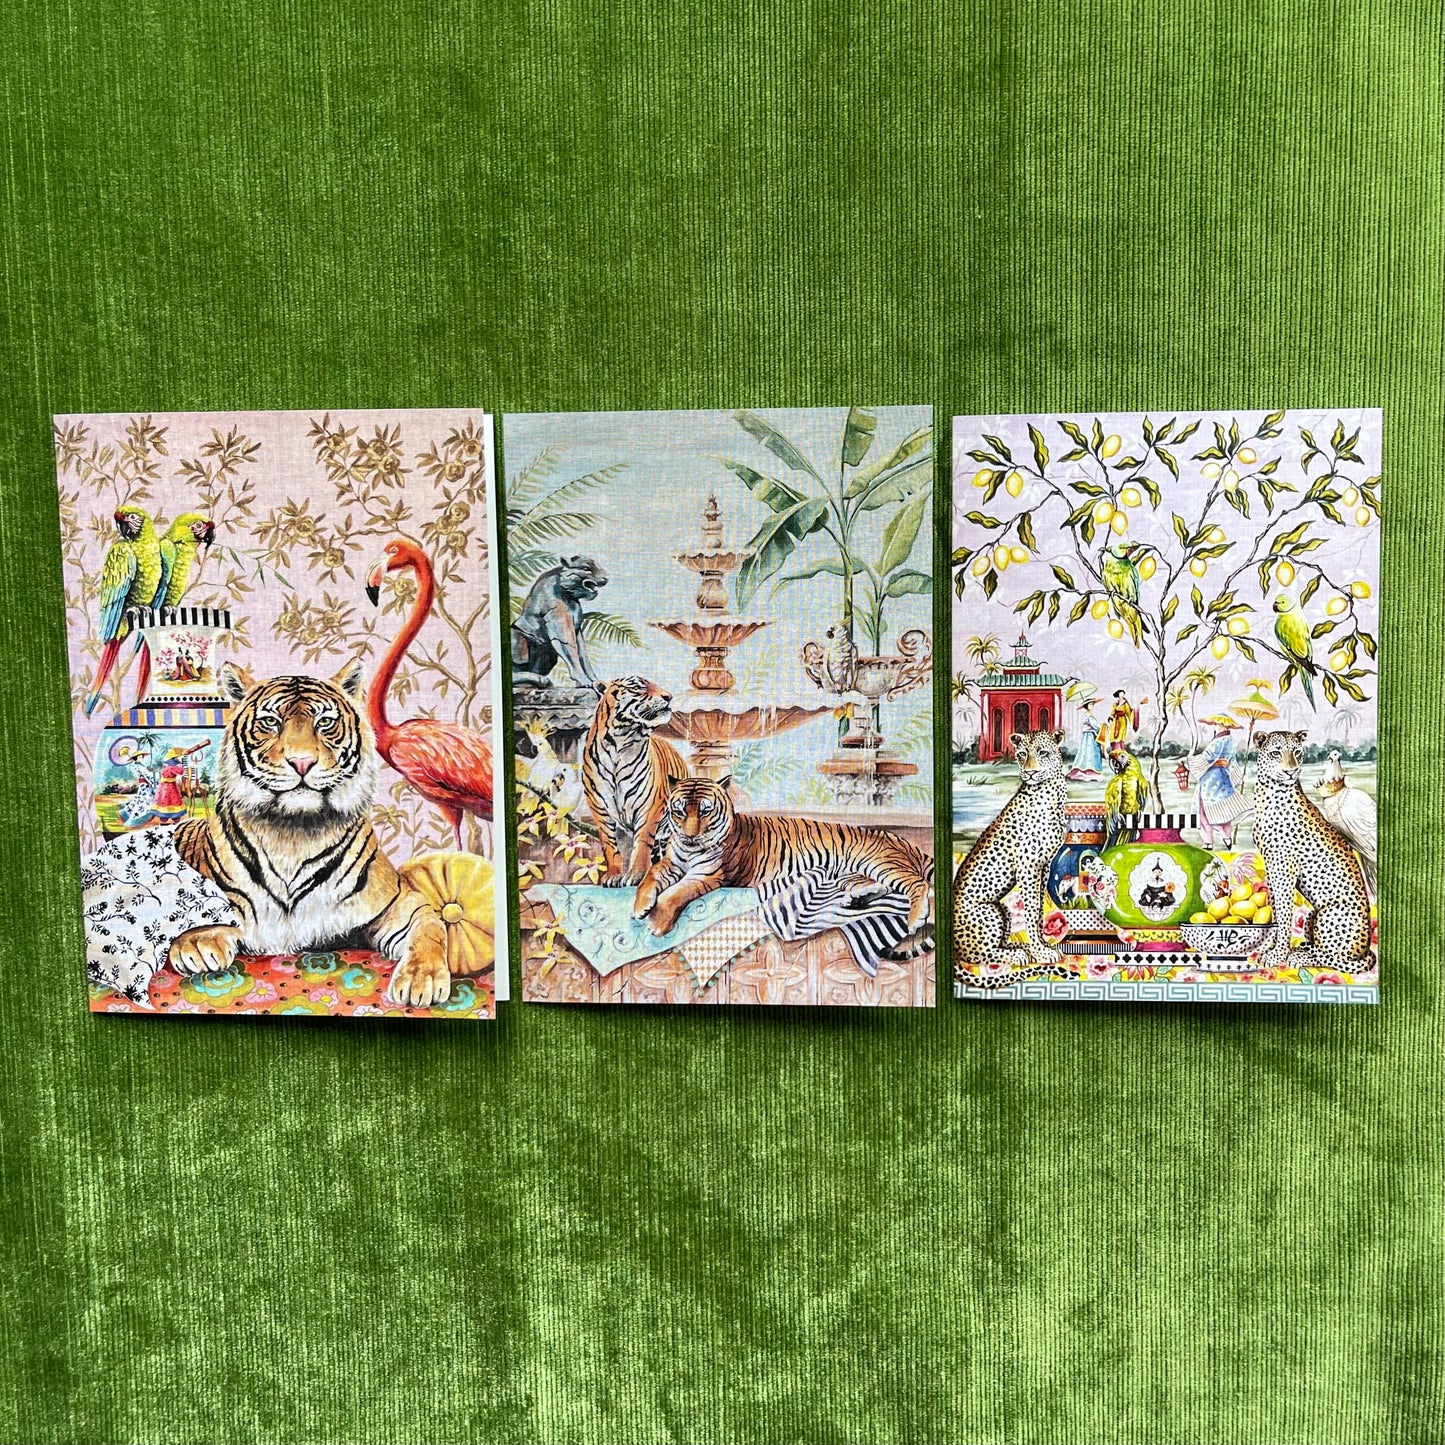 Cards "Tapestry Variety"